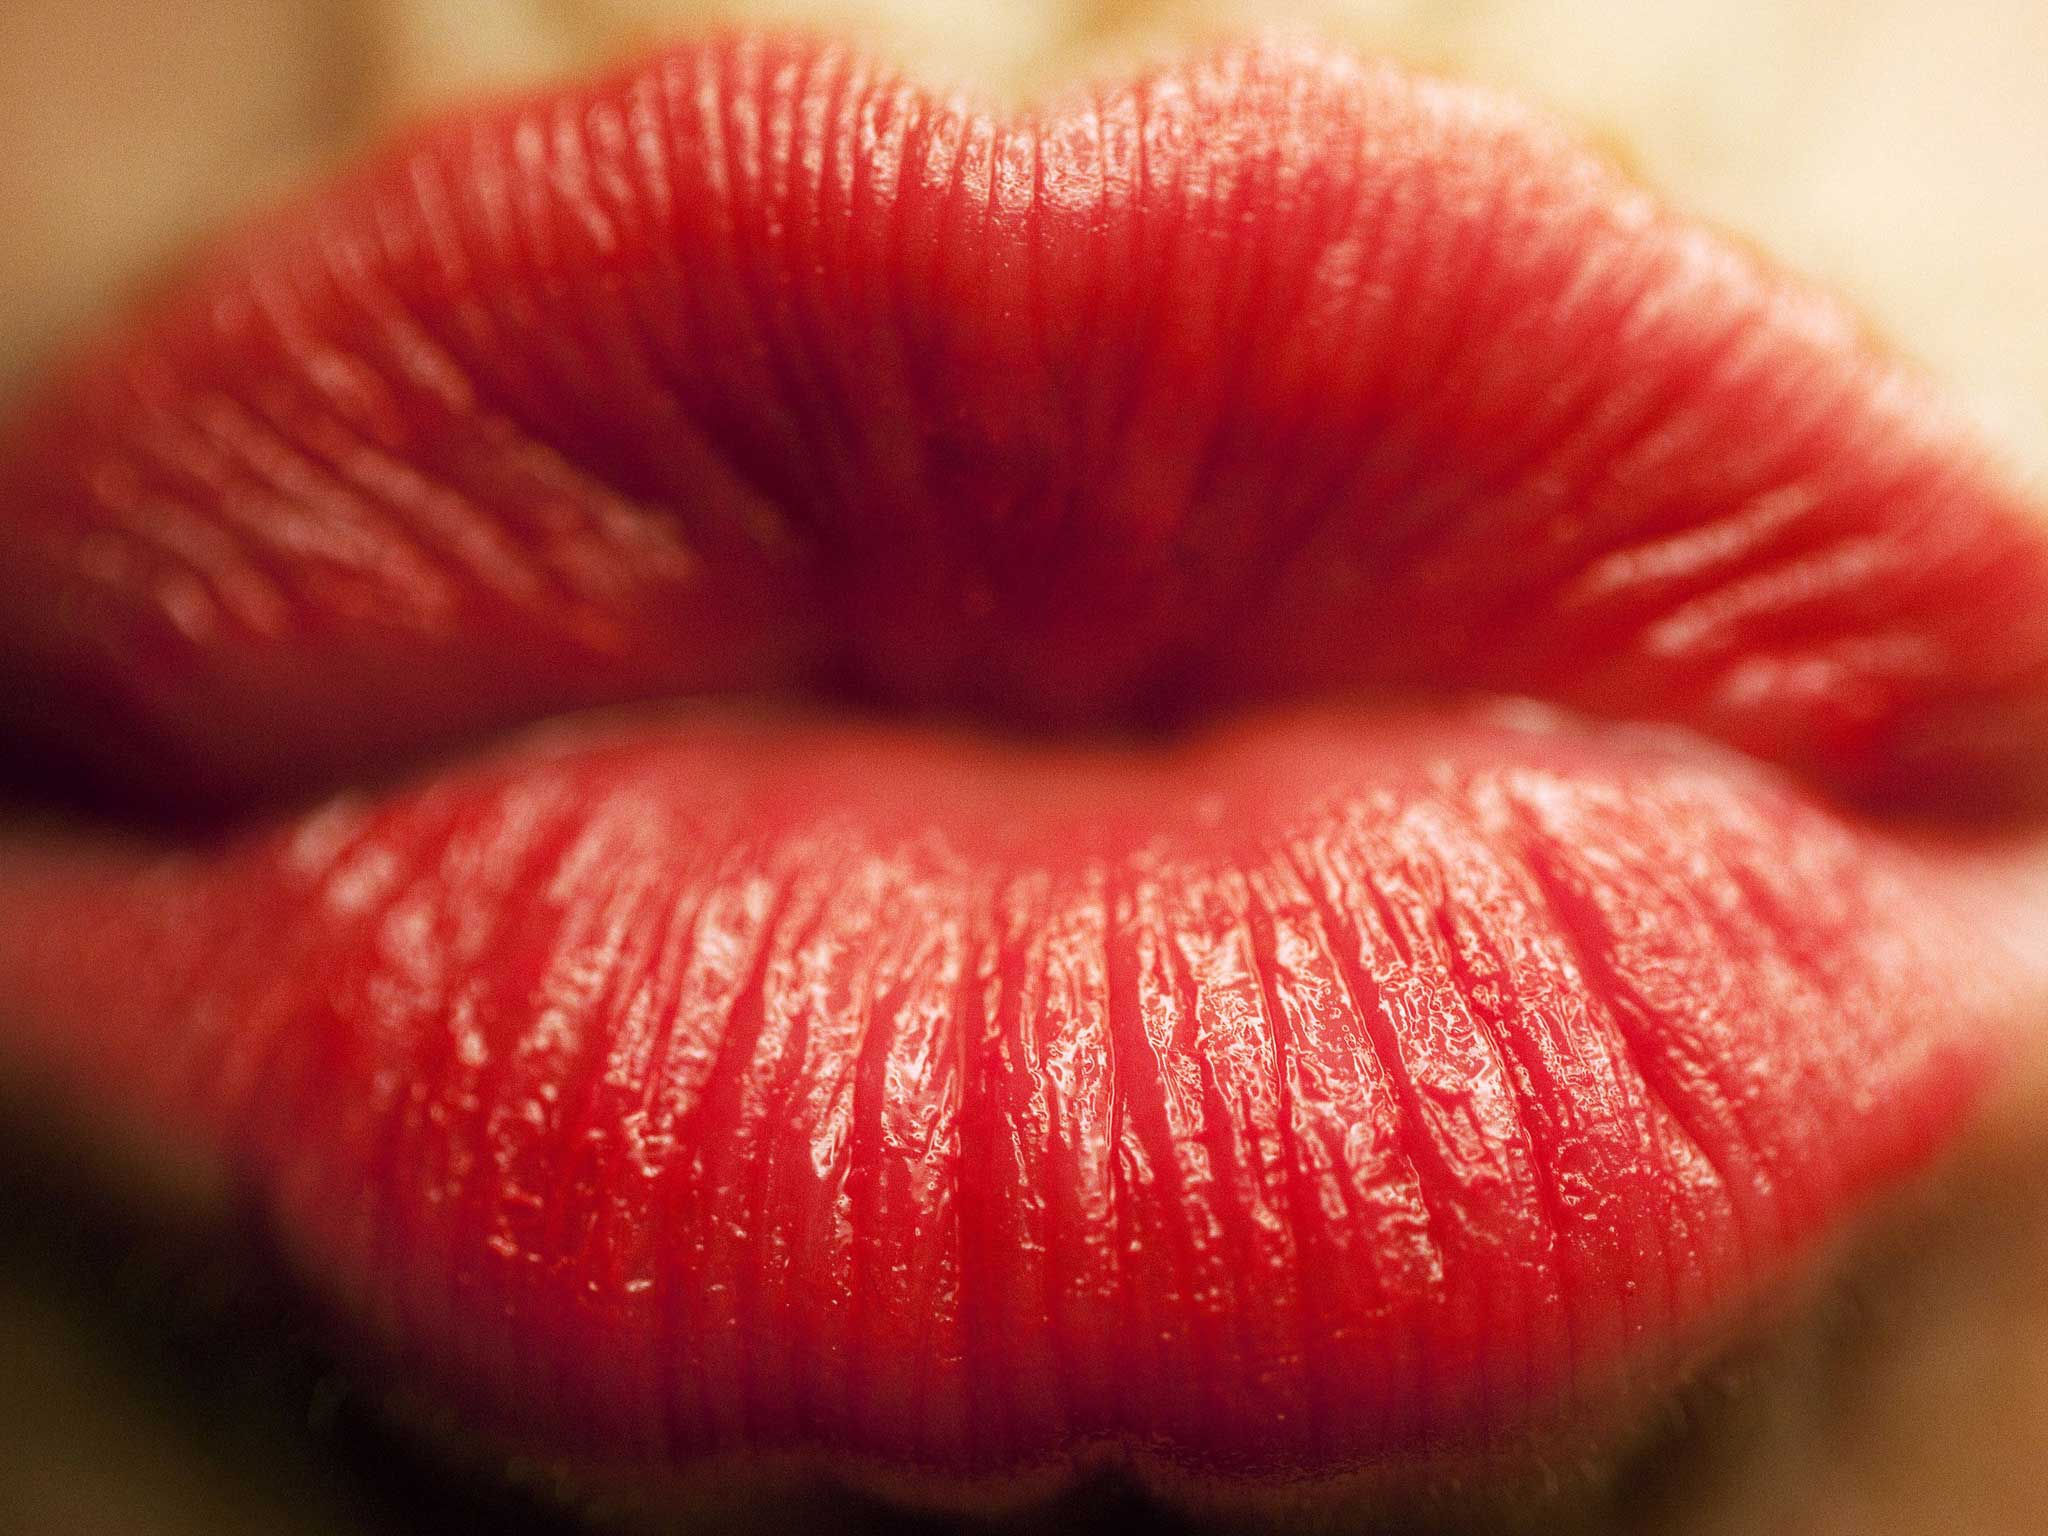 A Siberian senator has advised Russian women to stain lips with beetroot if they cannot afford imported make-up